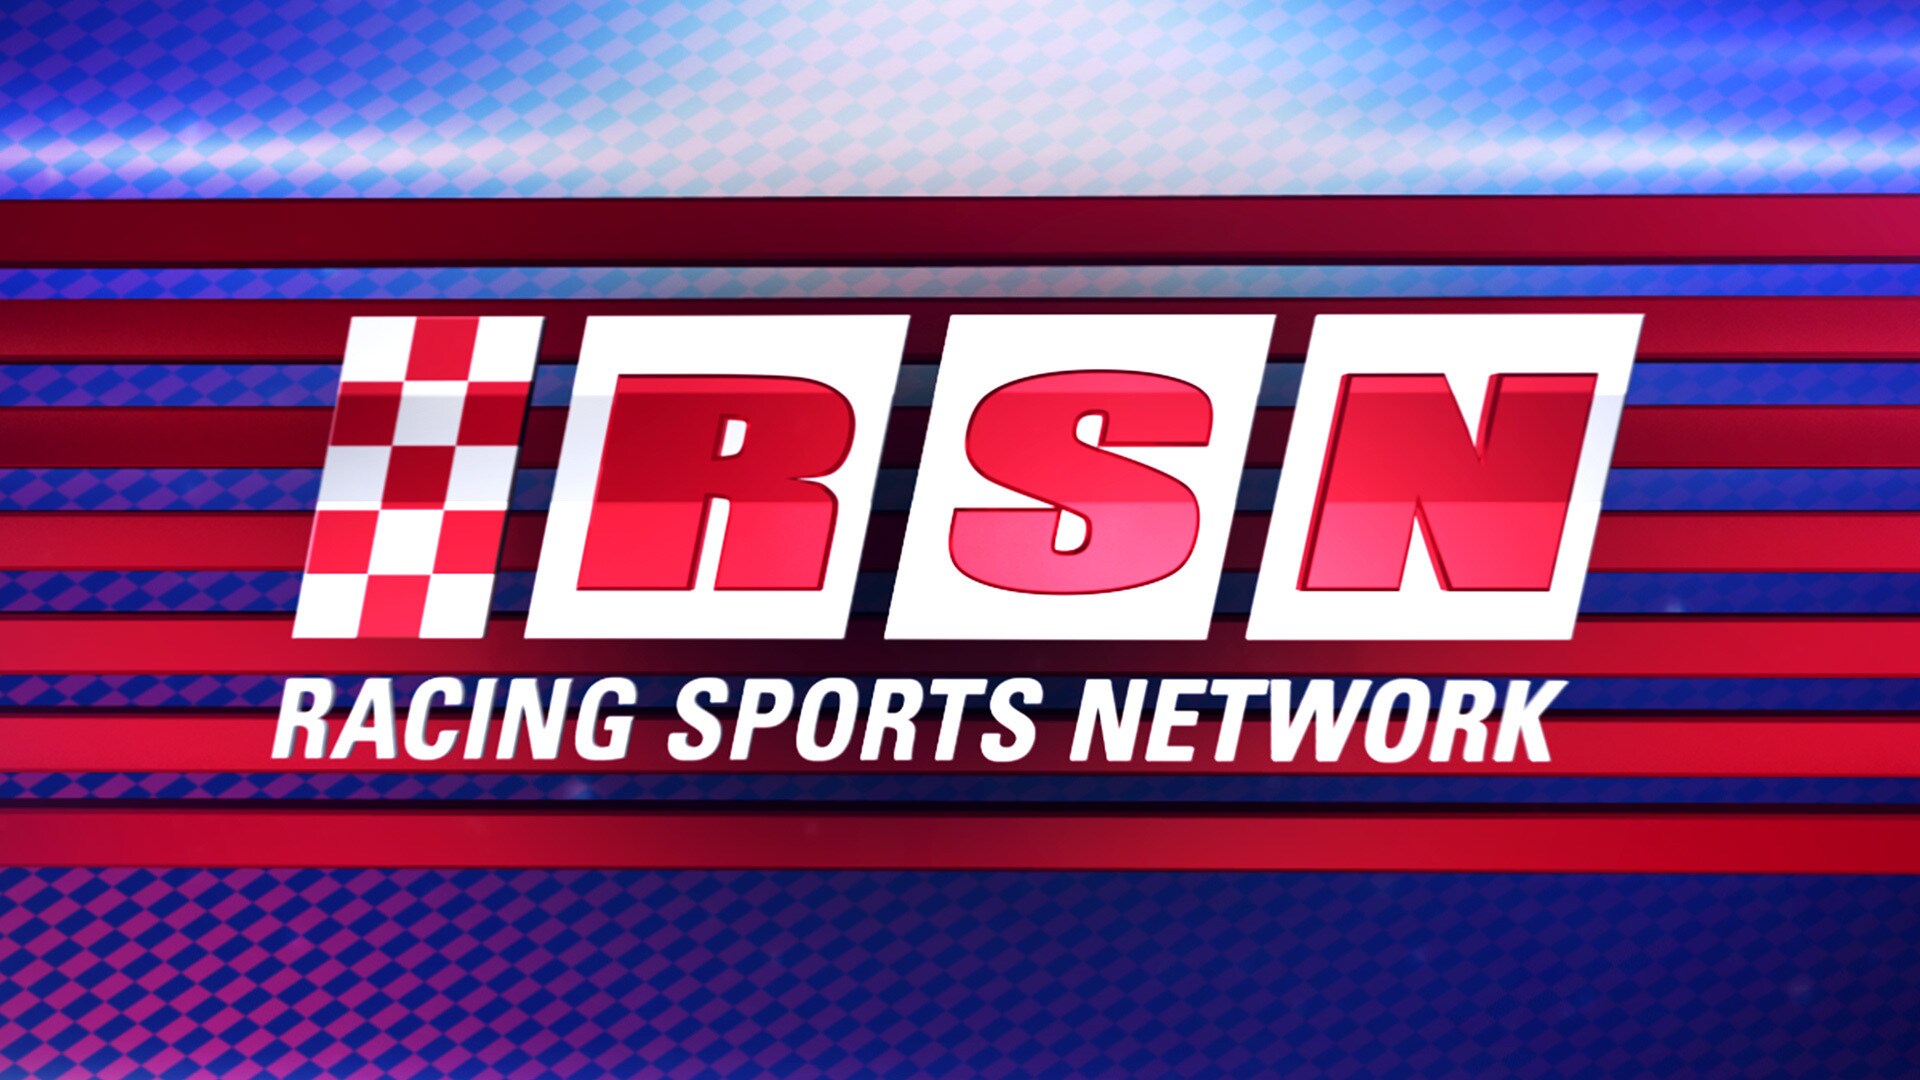 Introducing: Racing Sports Network | Cars Racing Sports Network by Disney